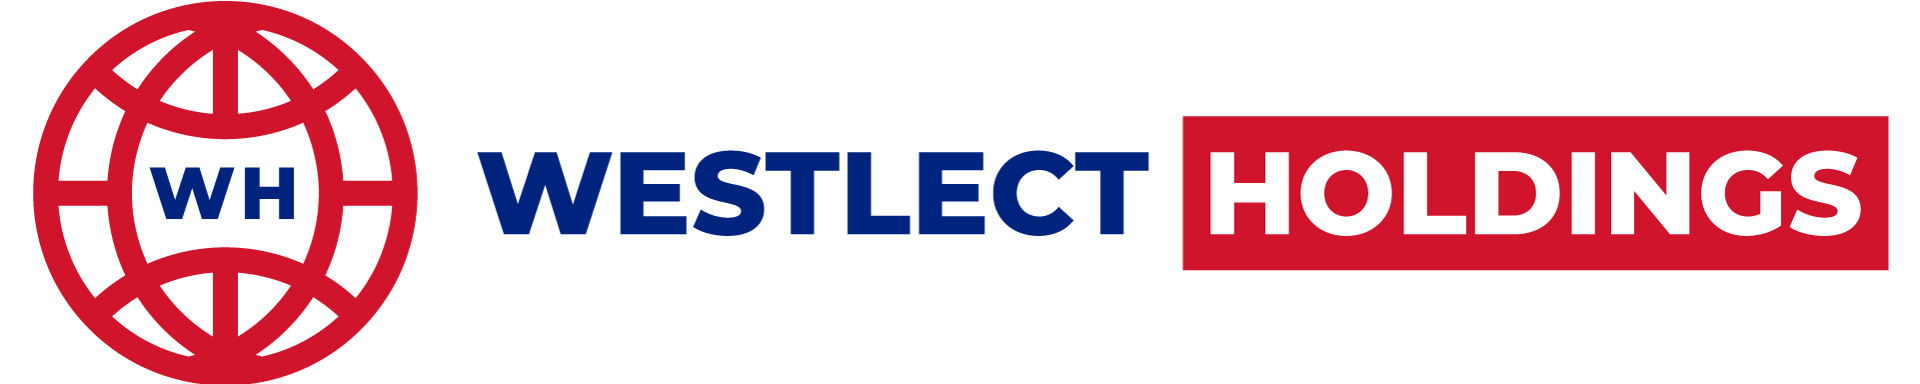 Westlect Holdings